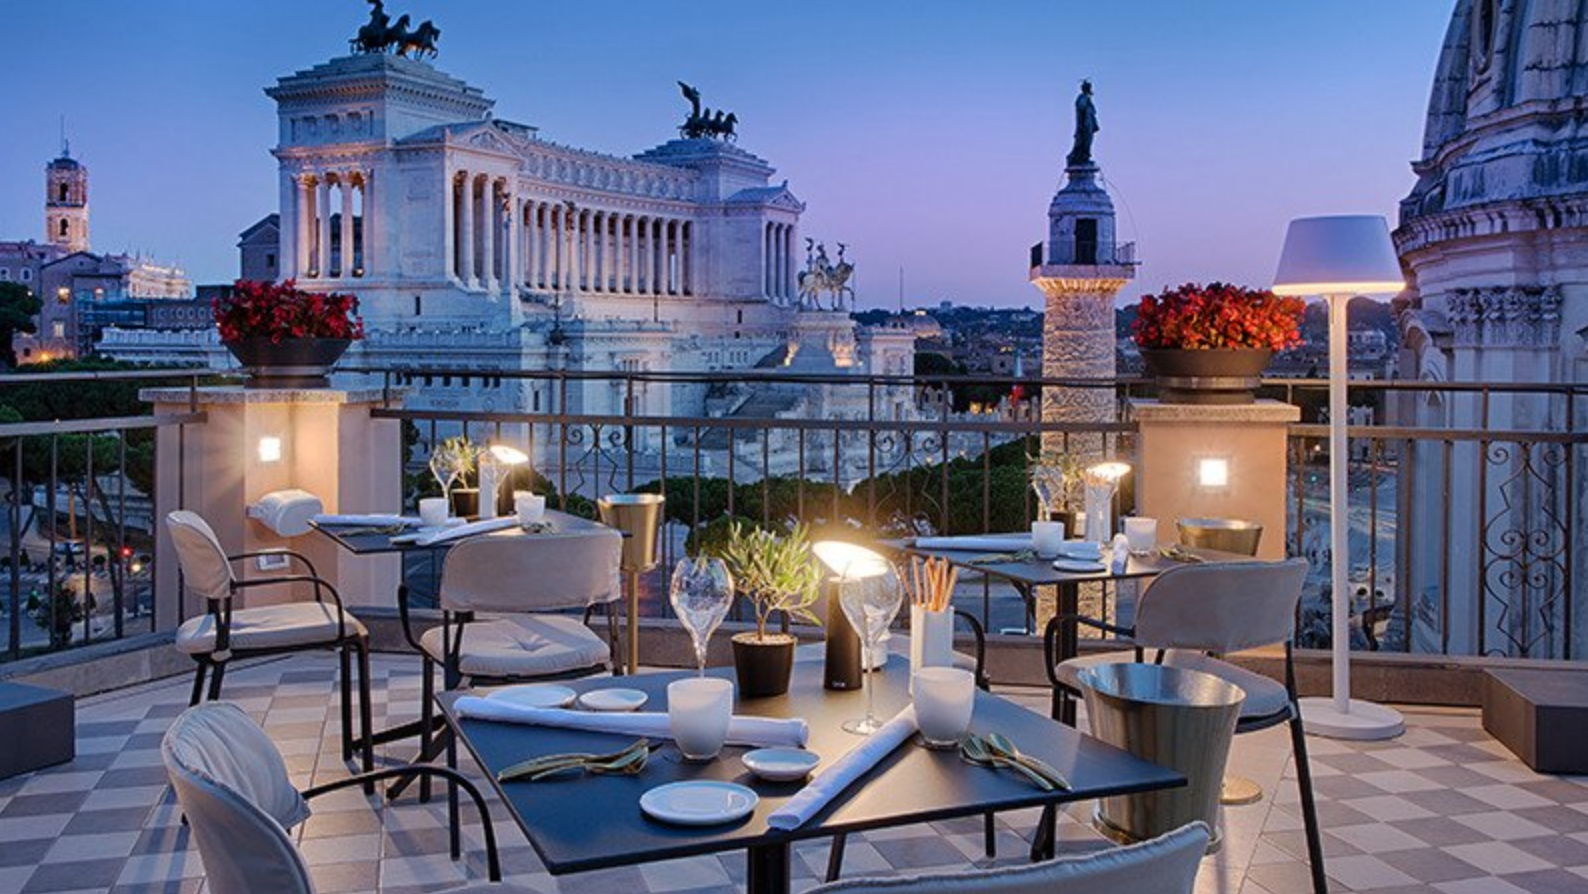 Oro bistrot best rooftop bar in rome for date night